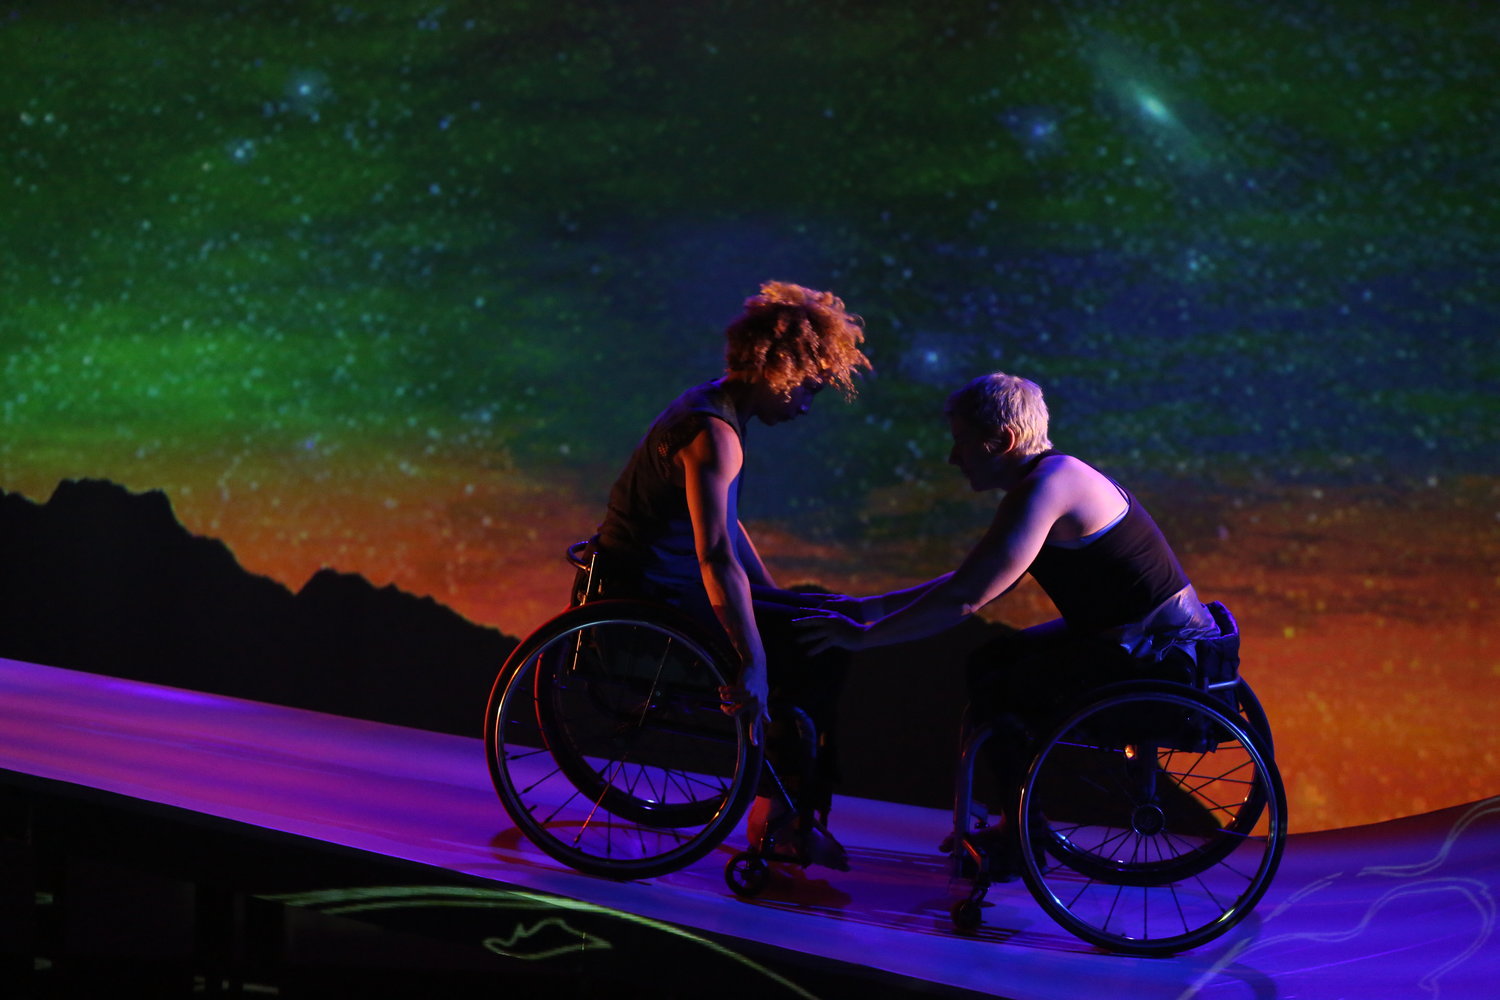 Against Michael Maag’s glowing green, gold, and blue starry sky, the ramp shines with lilac stripes and shadowy projections. Alice Sheppard, a light-skinned multiracial Black woman. wheels downhill, curly hair flying; she pushes Laurel Lawson, a white woman with very short cropped hair in a wheelchair, backwards. Laurel rests her hands on Alice's knees as they lock eyes.